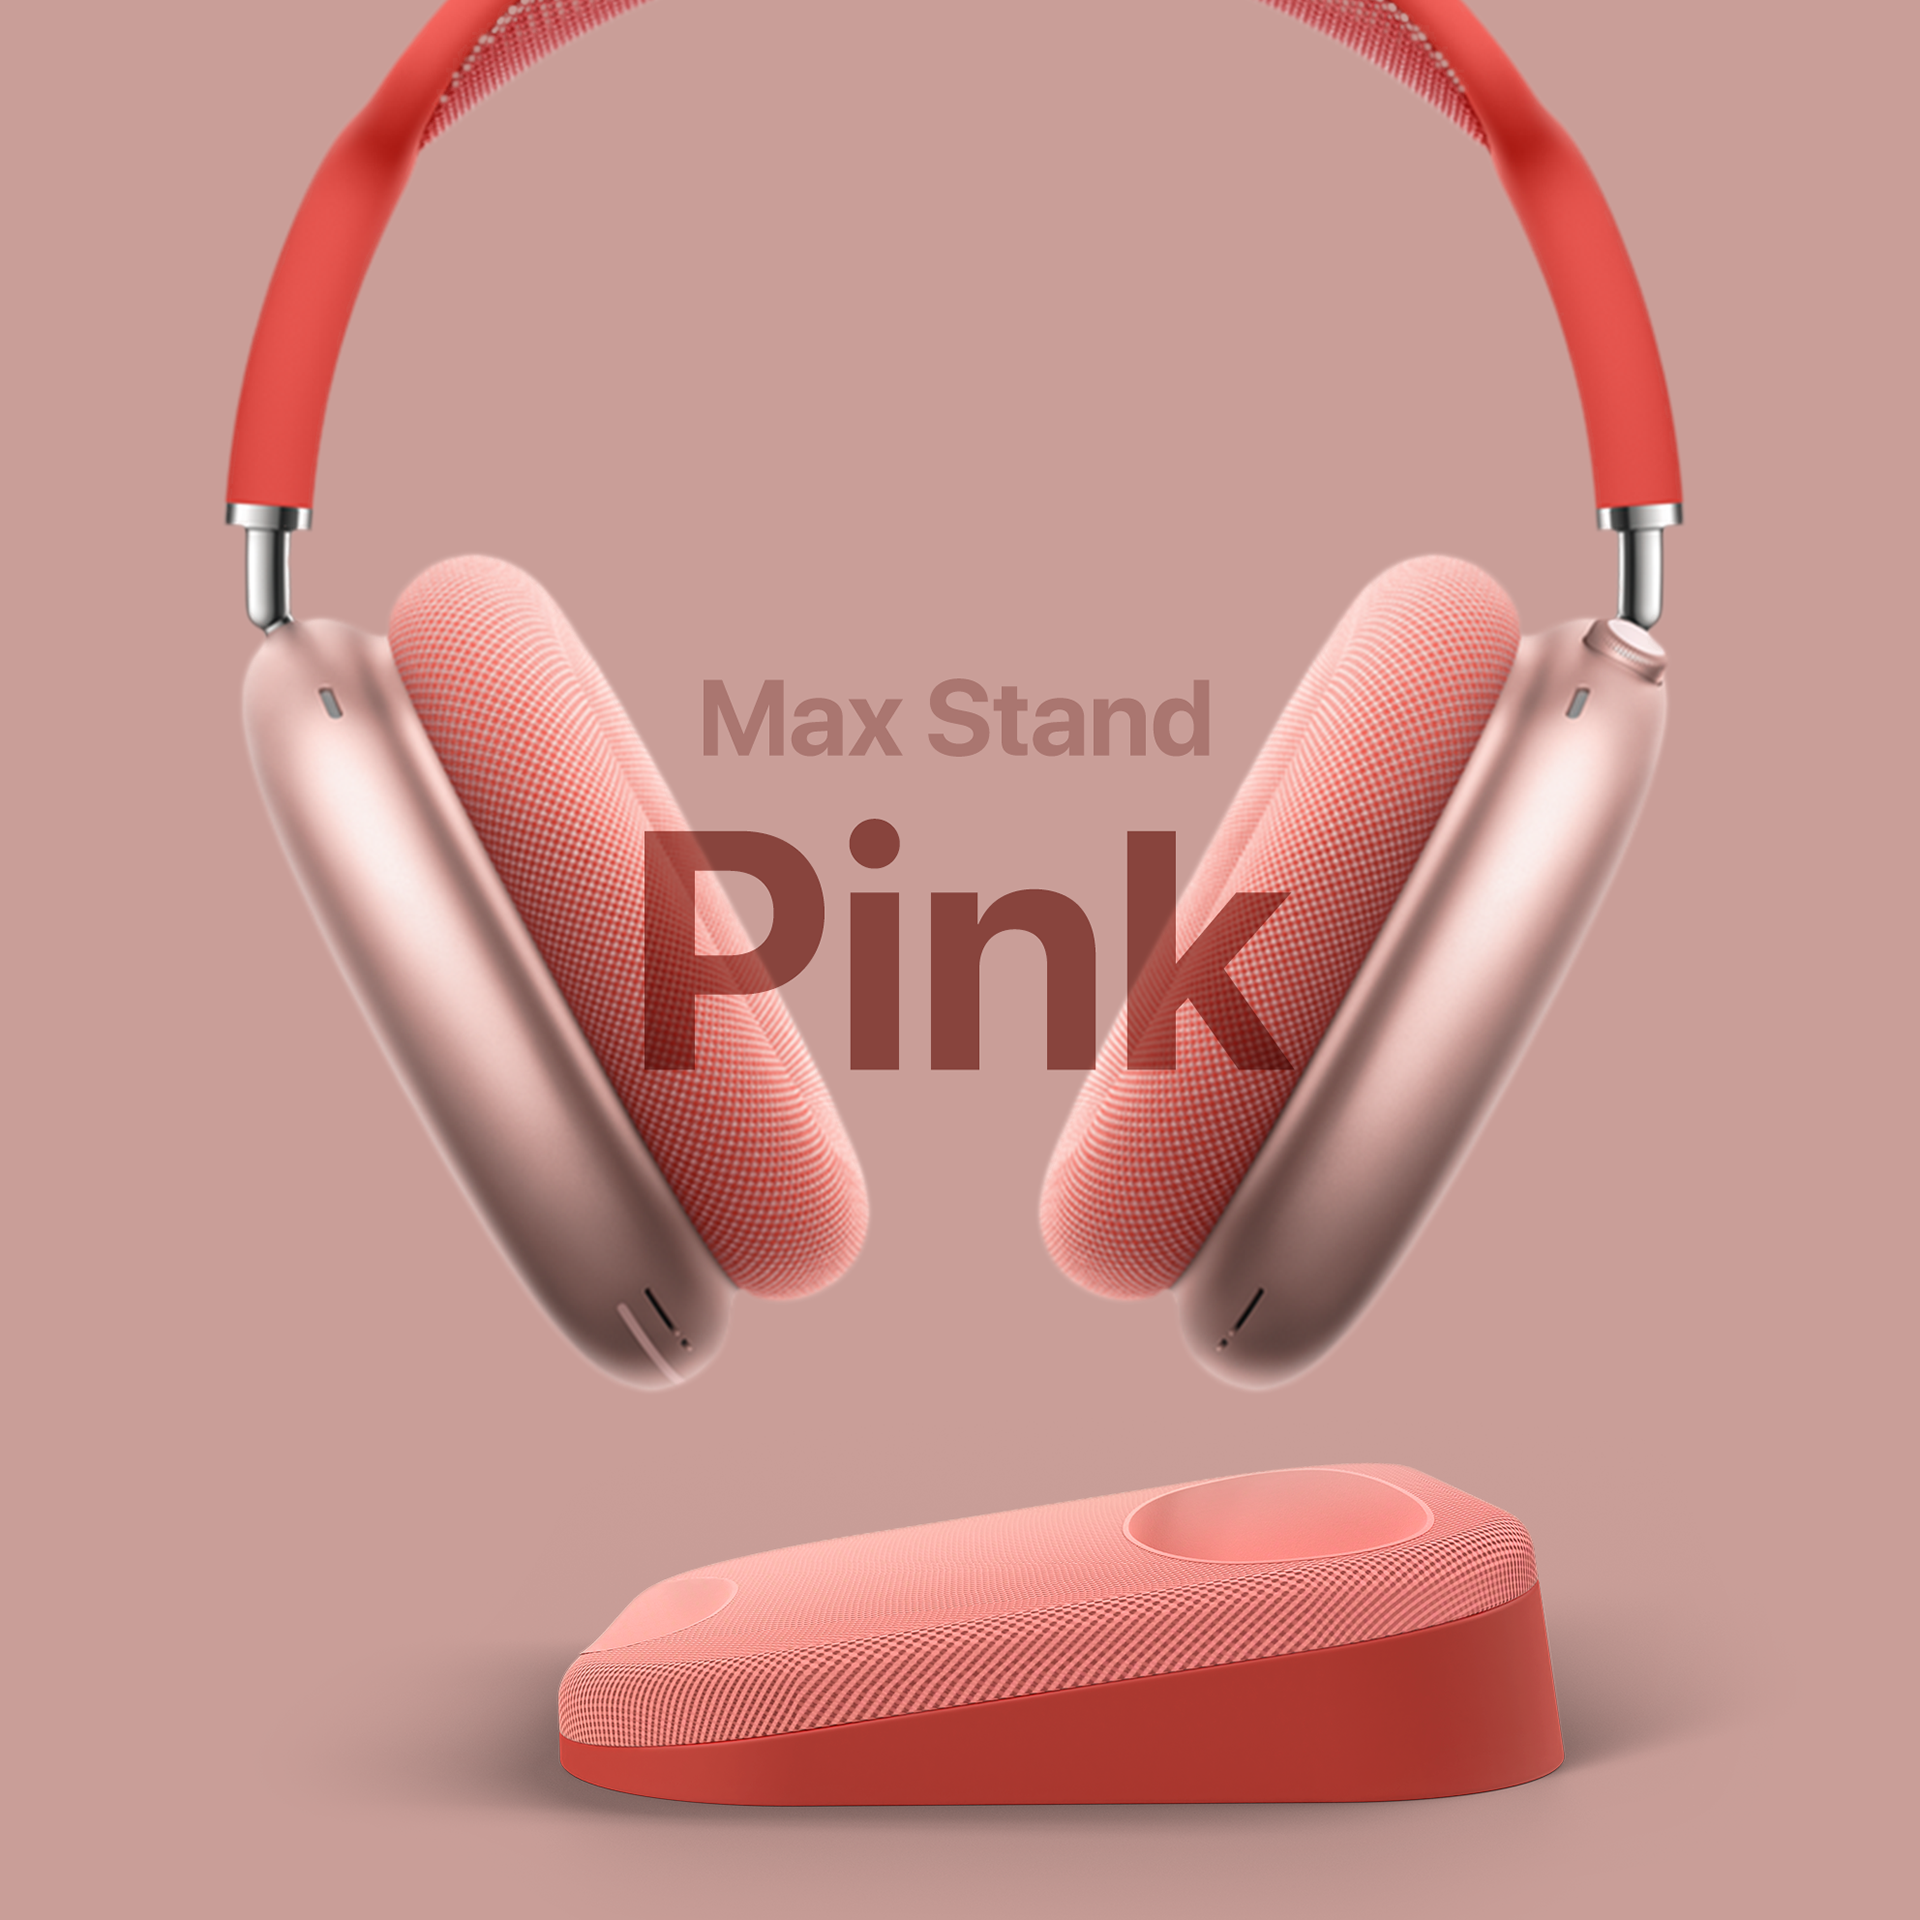 The Max Stand